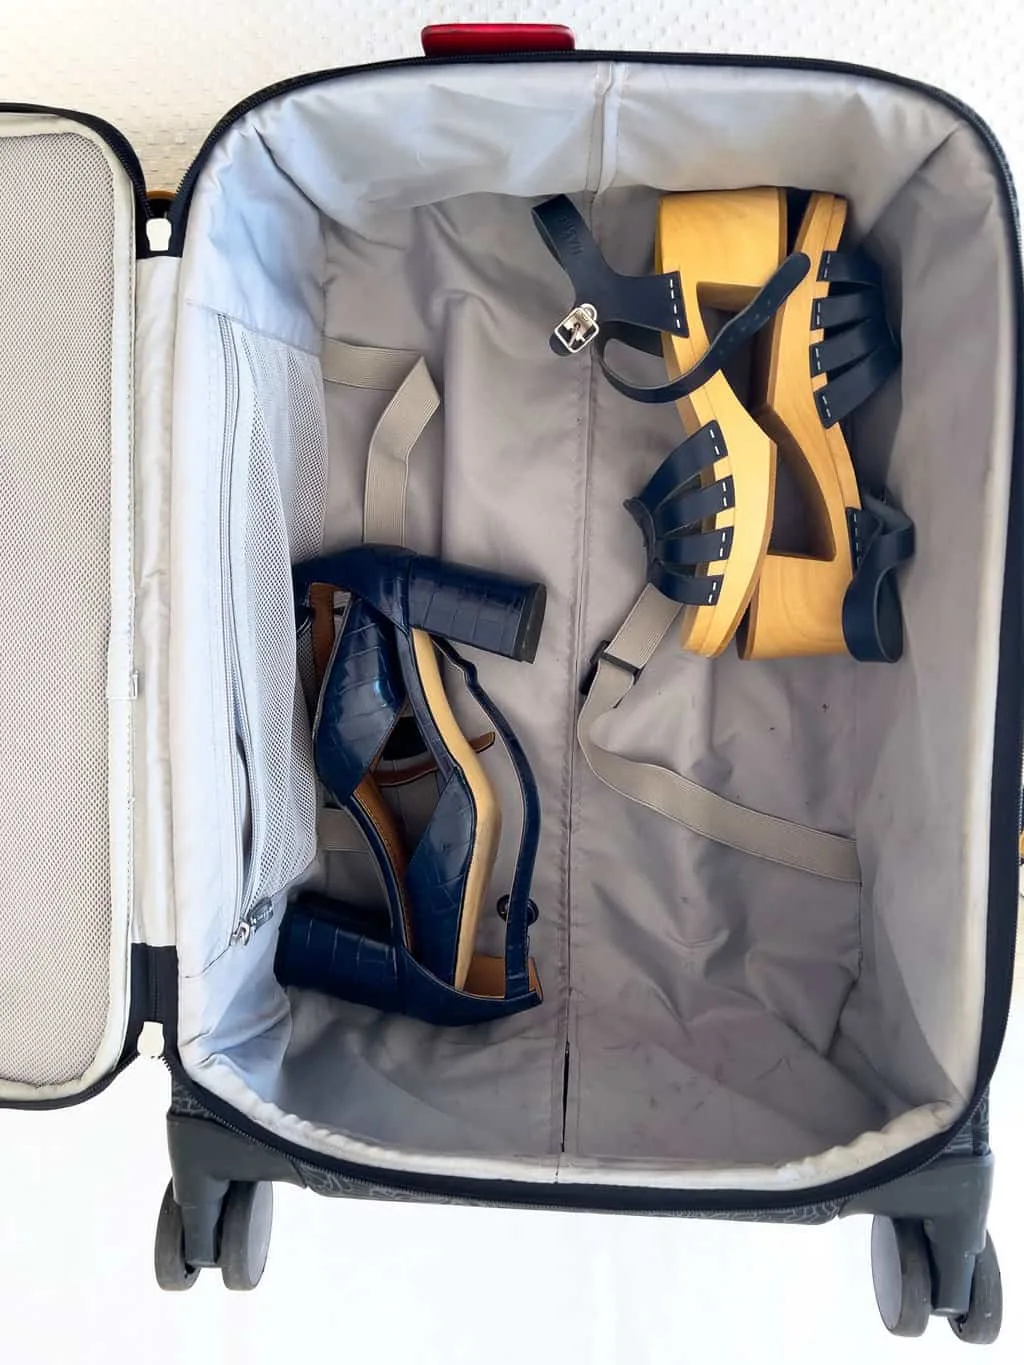 Two pairs of ladies heels in a grey suitcase. They are at opposite corners of the suitcase on their side. Both shoes are navy blue. 